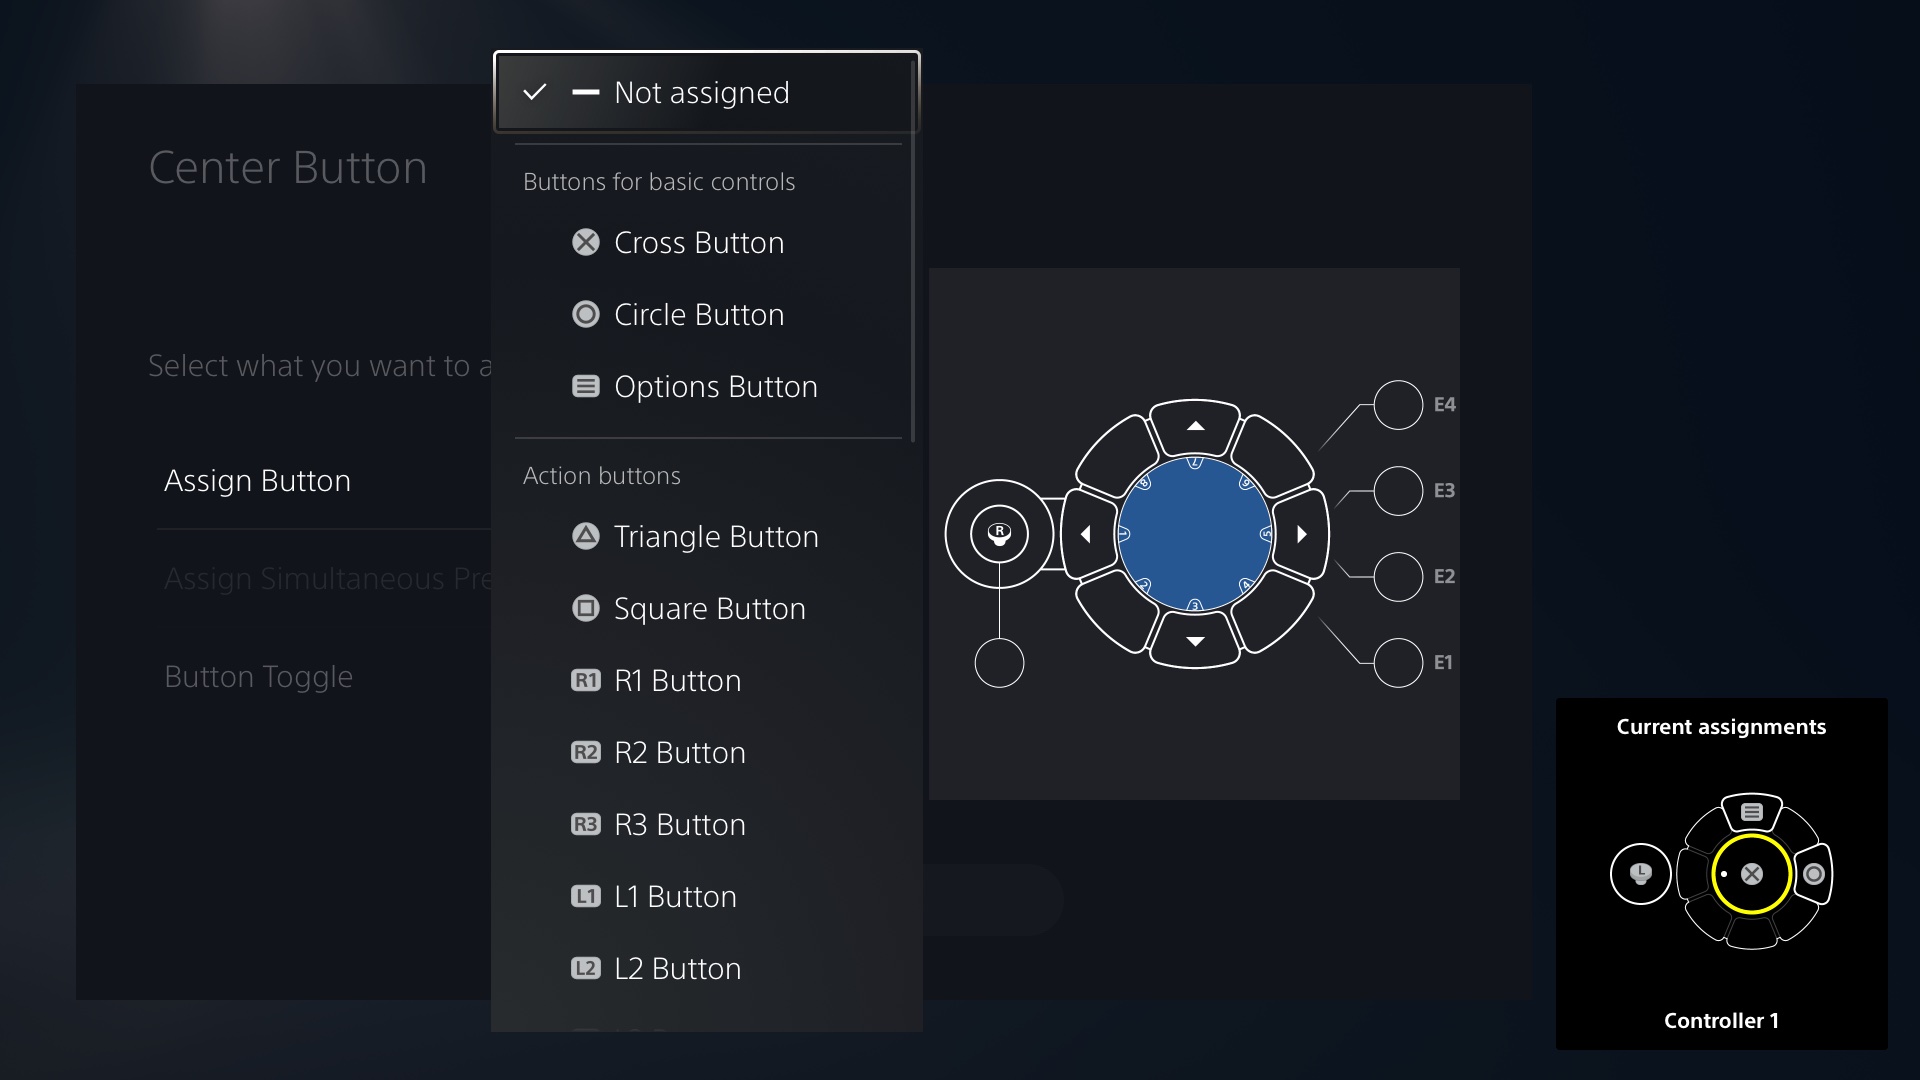  "An image of the access controller user interface showing button assignment options"